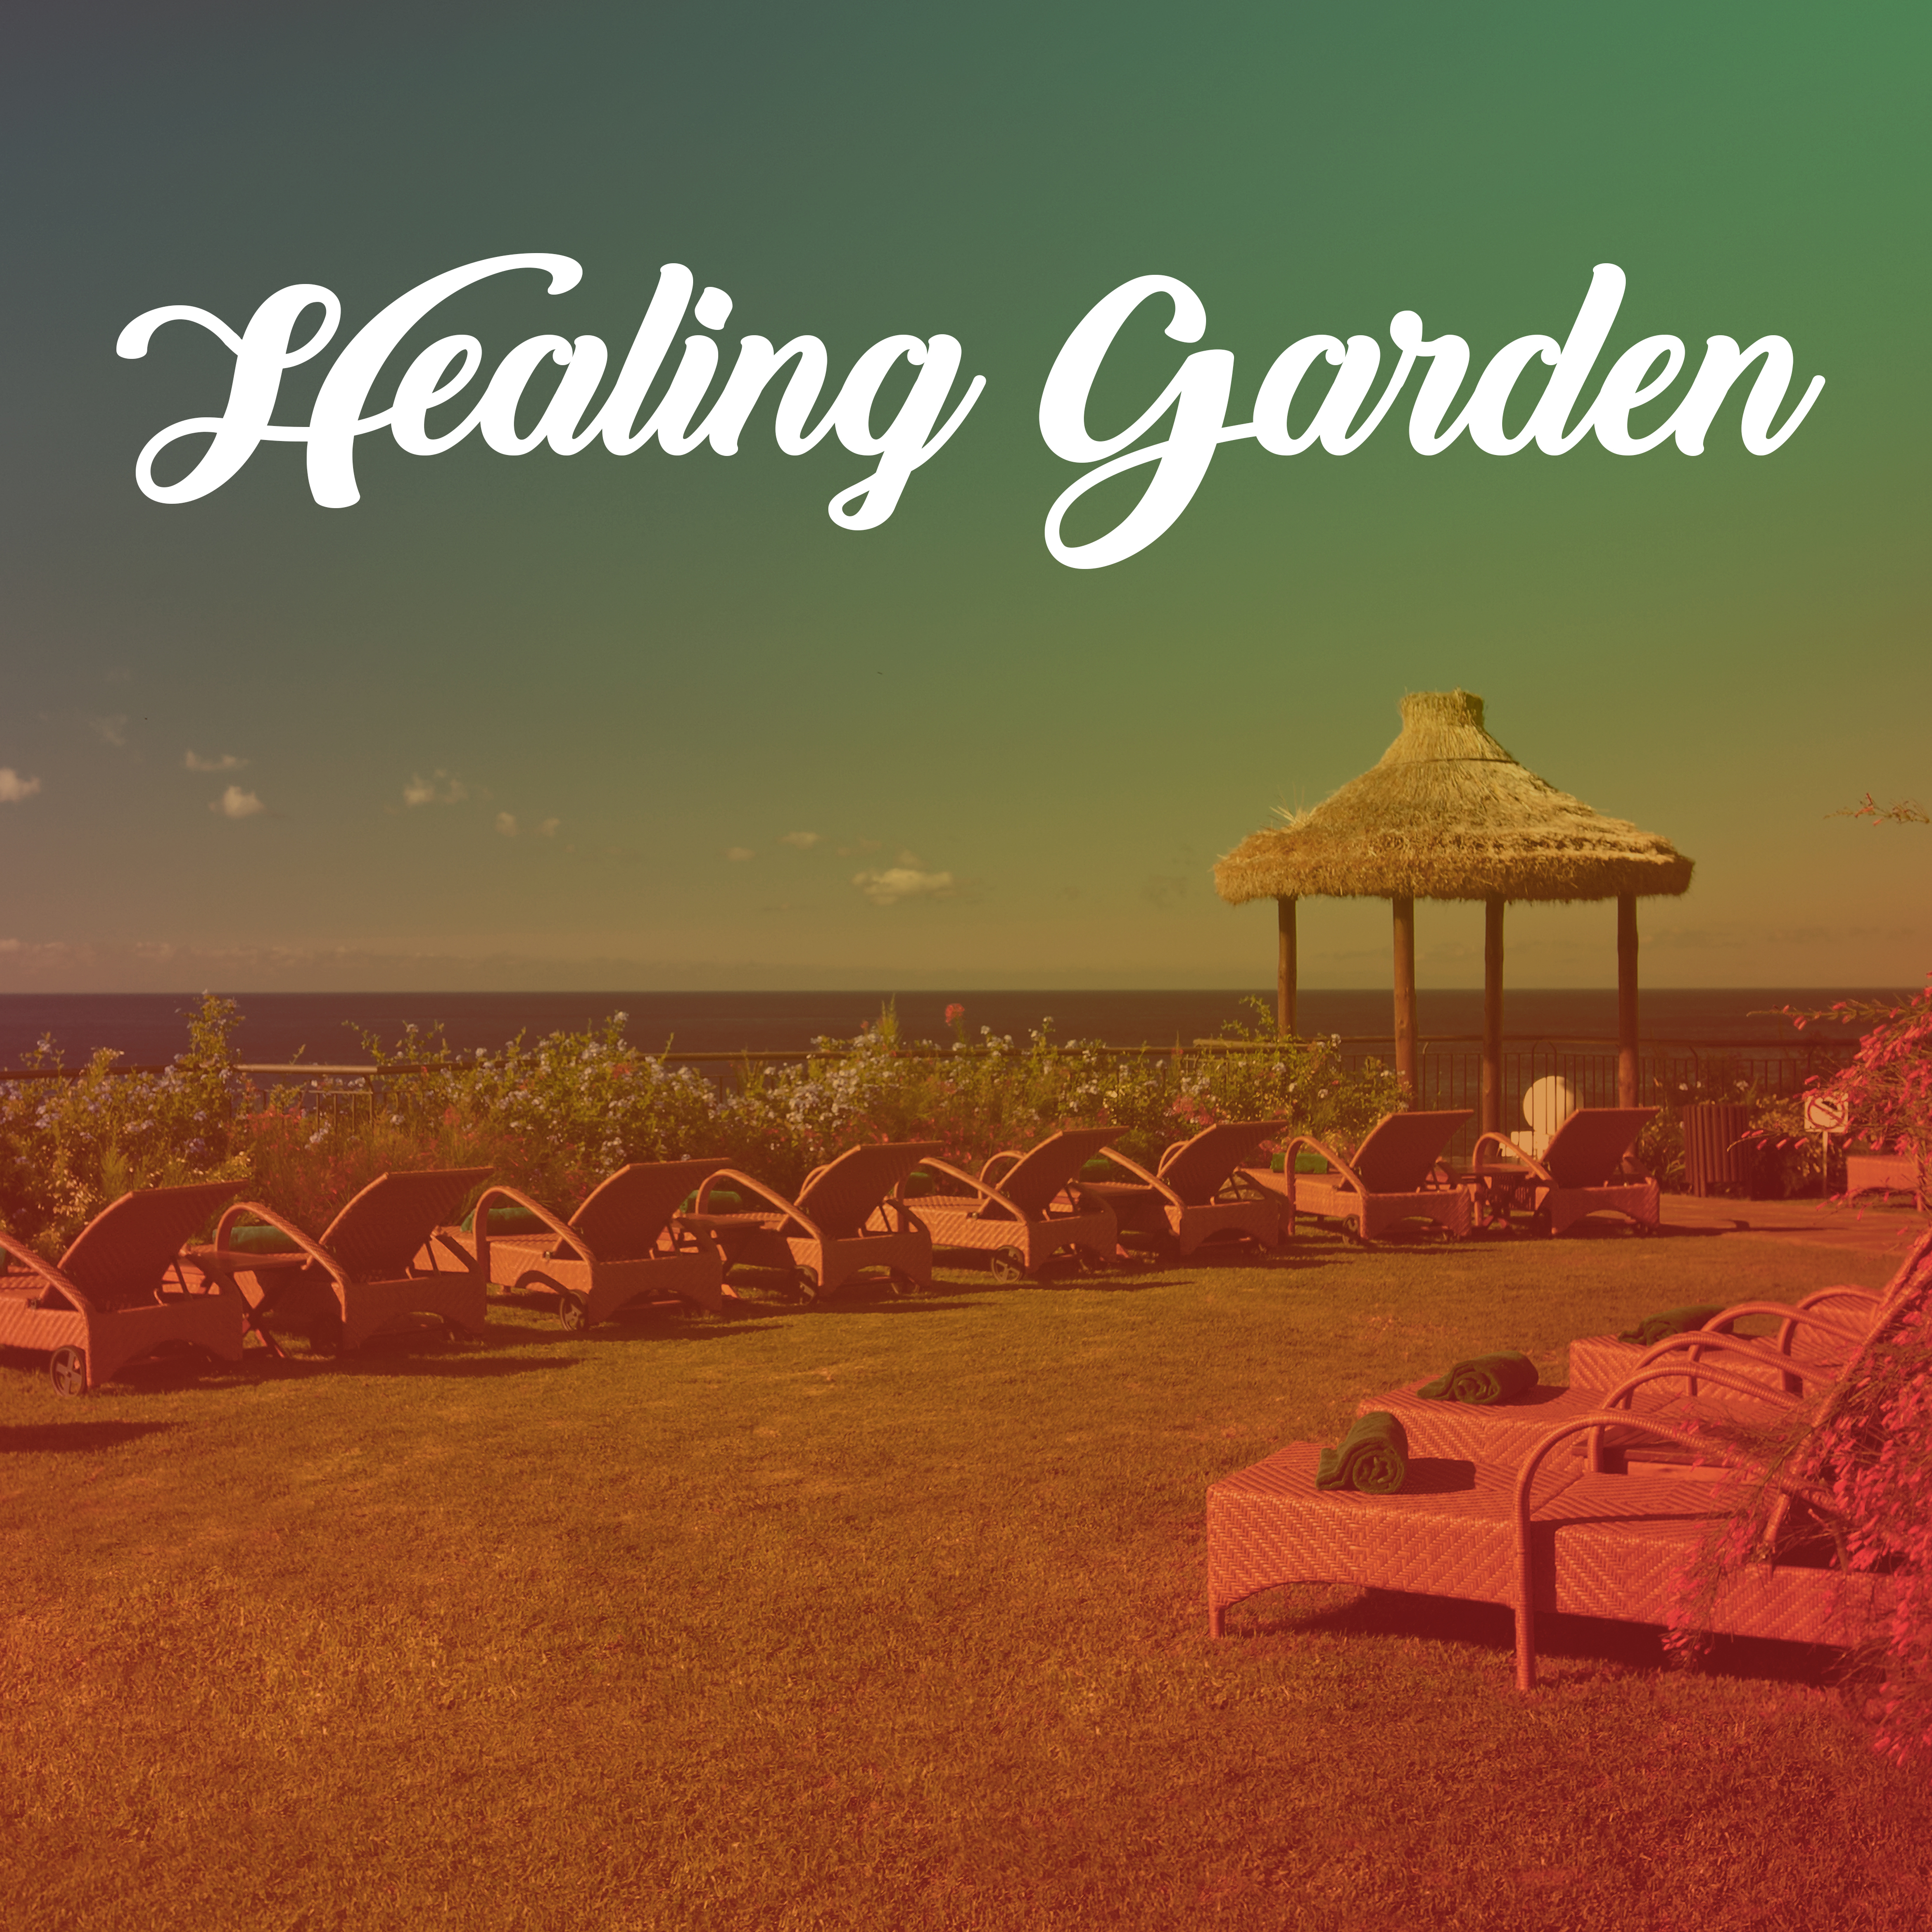 Healing Garden   Music for Massage Therapy, Spa, Wellness Treatments, Relaxing Music, Healing Sounds of Nature